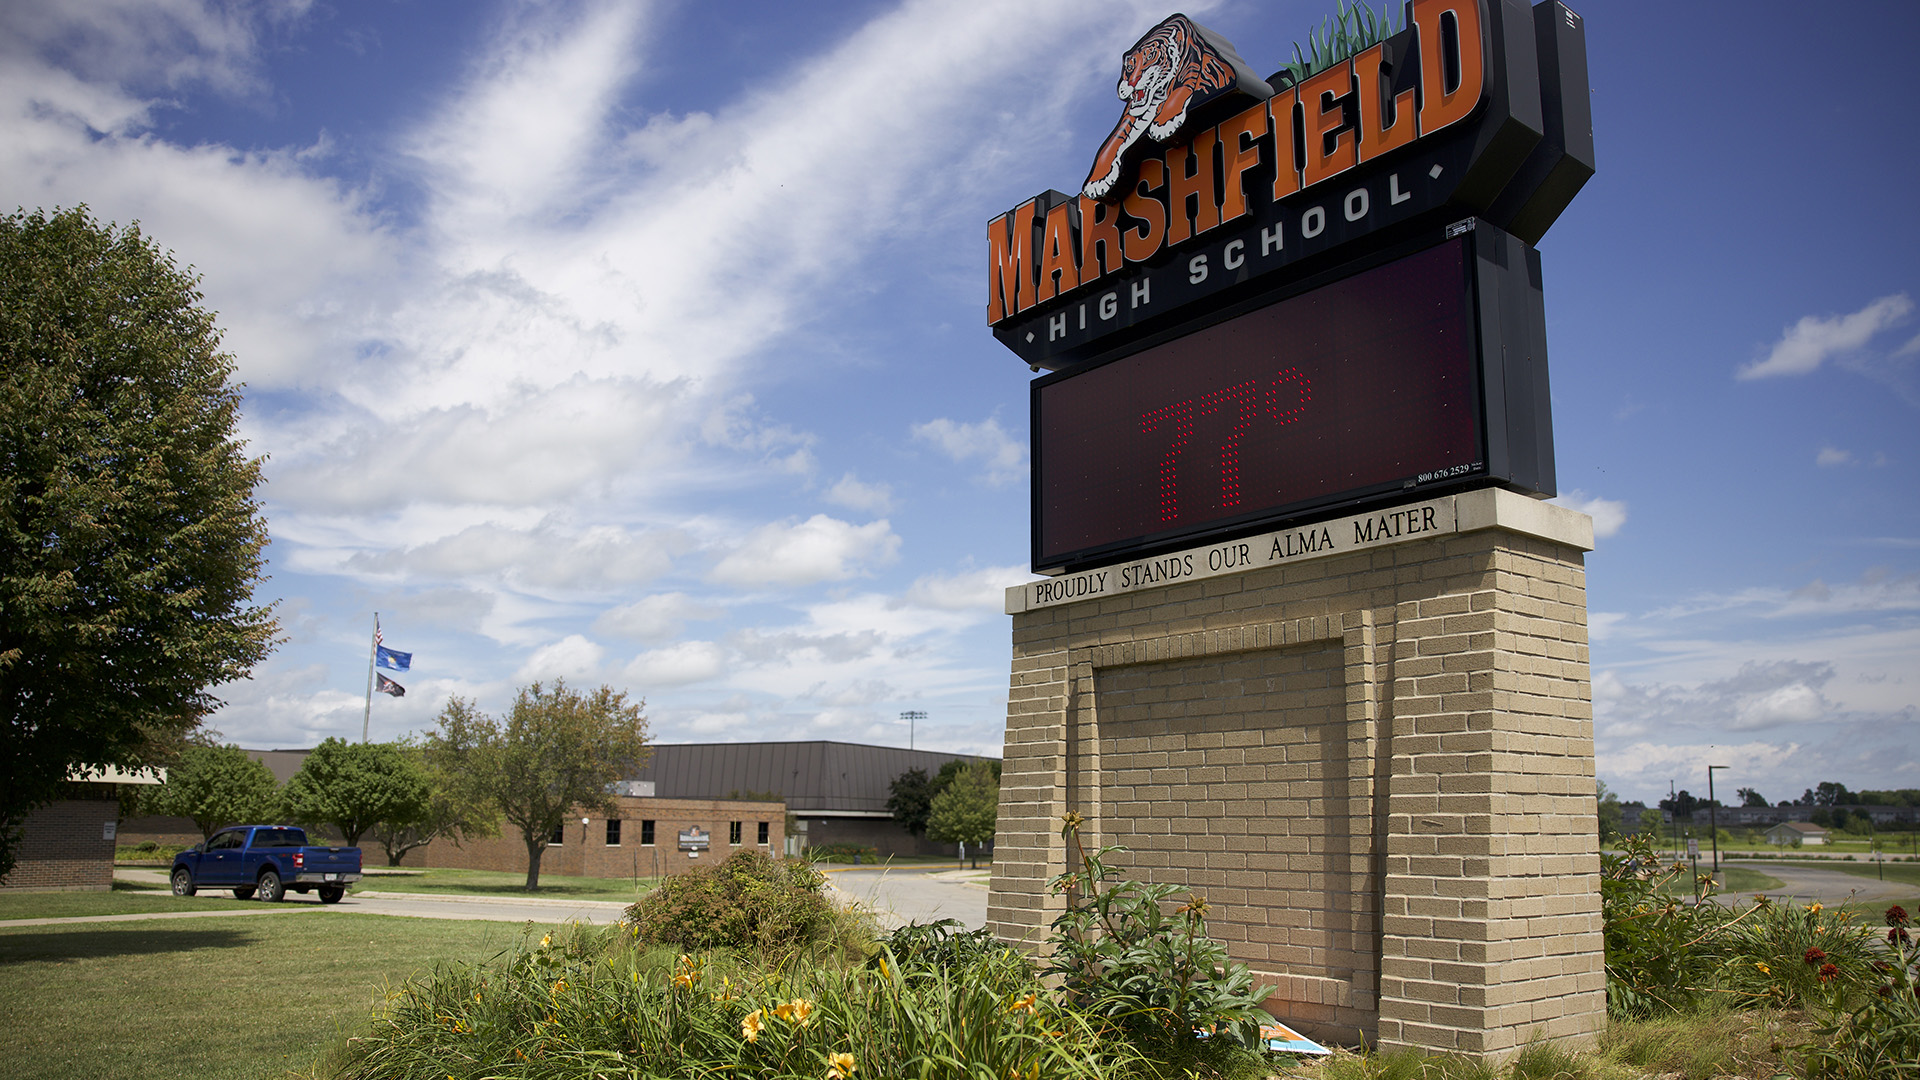 A sign with a graphic of a tiger and a wordmark reading "Marshfield High School" tops a sign with a screen showing the temperature, an inscription reading "Proudly Stands Our Alma Mater" and a brick plinth, with buildings trees and a parked vehicle in the background.